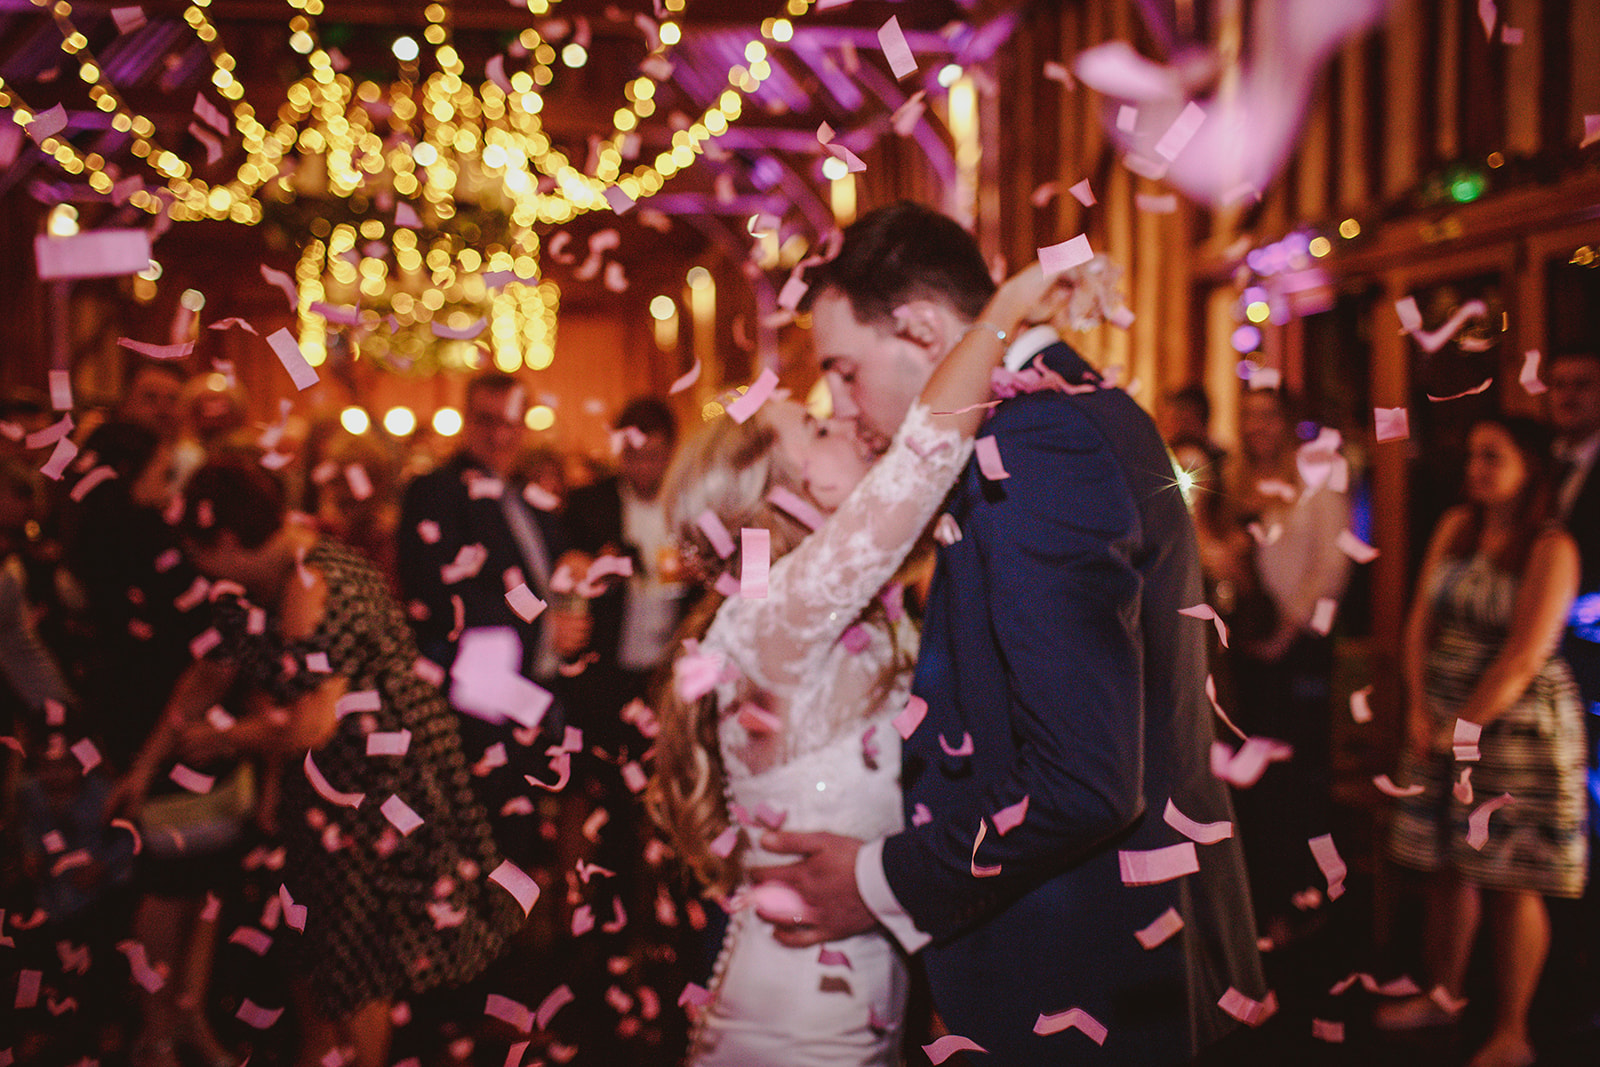 Lillibrooke Manor wedding couple doing first dance with confetti